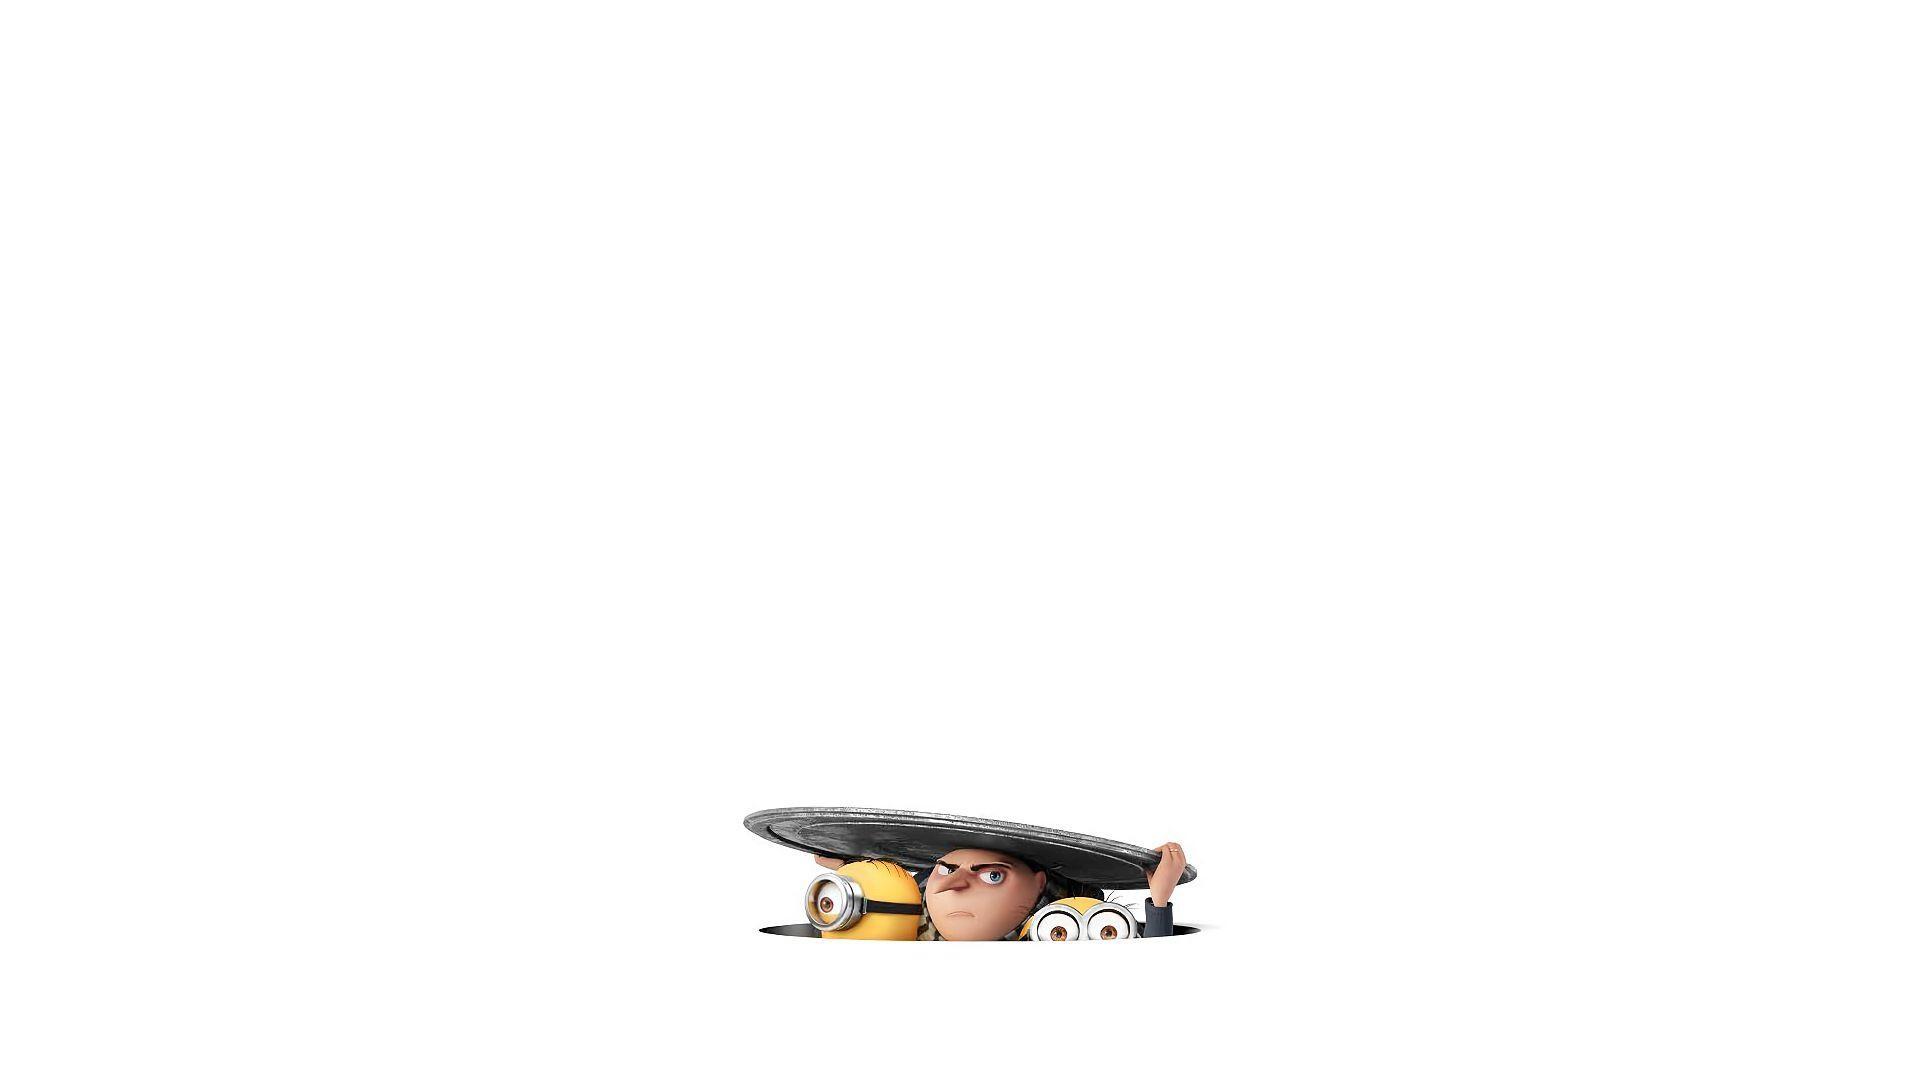 Despicable Me 3 Gru and Minions Wallpaper